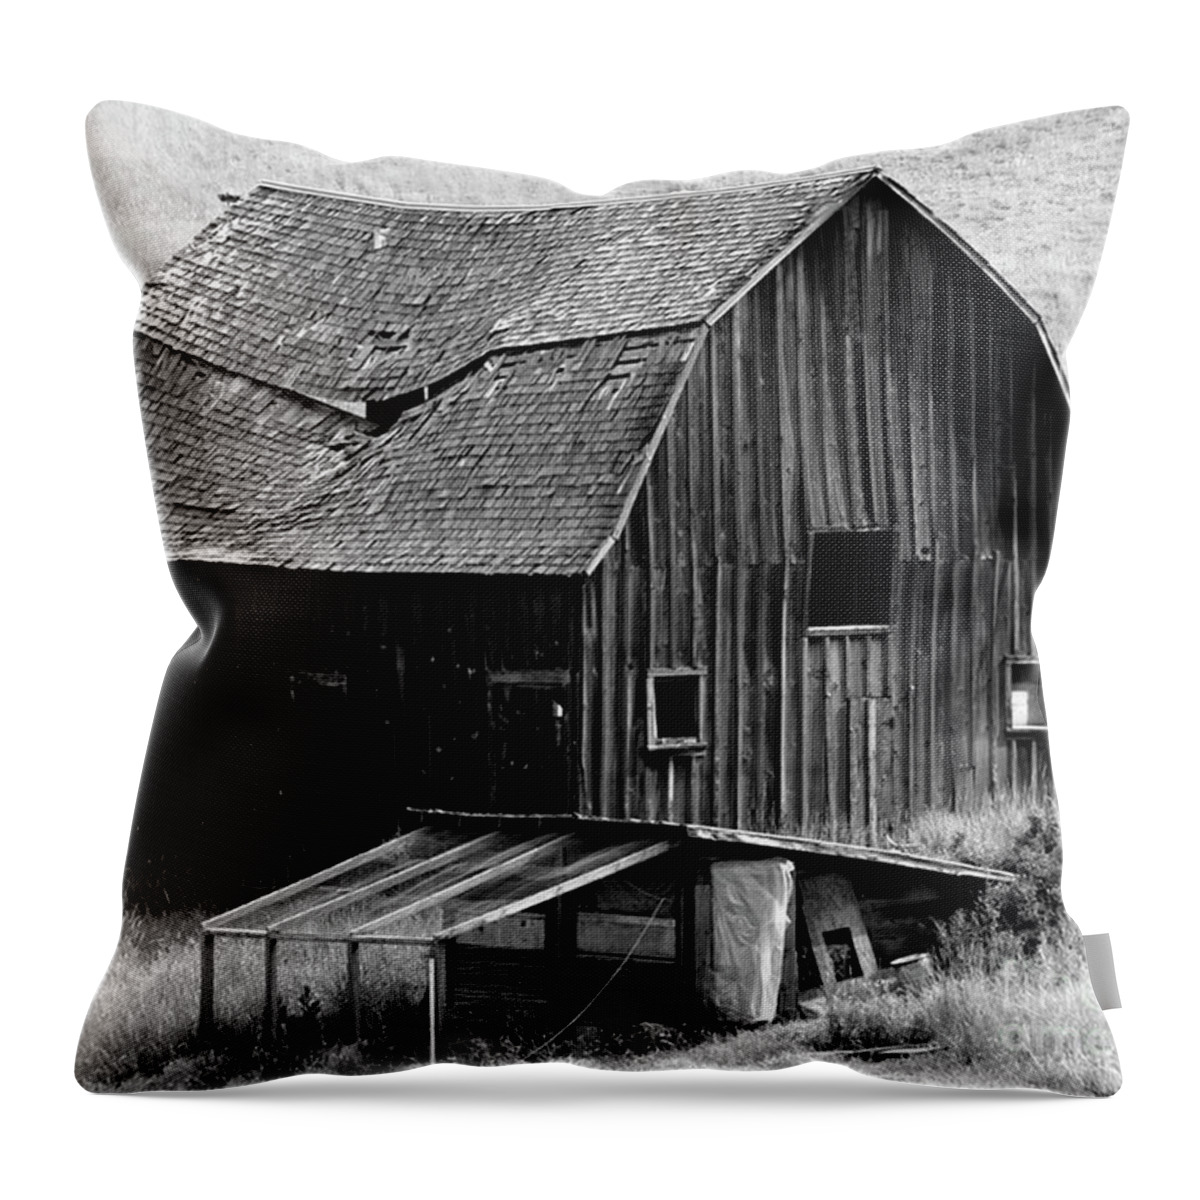 Denise Bruchman Throw Pillow featuring the photograph Collapsing by Denise Bruchman